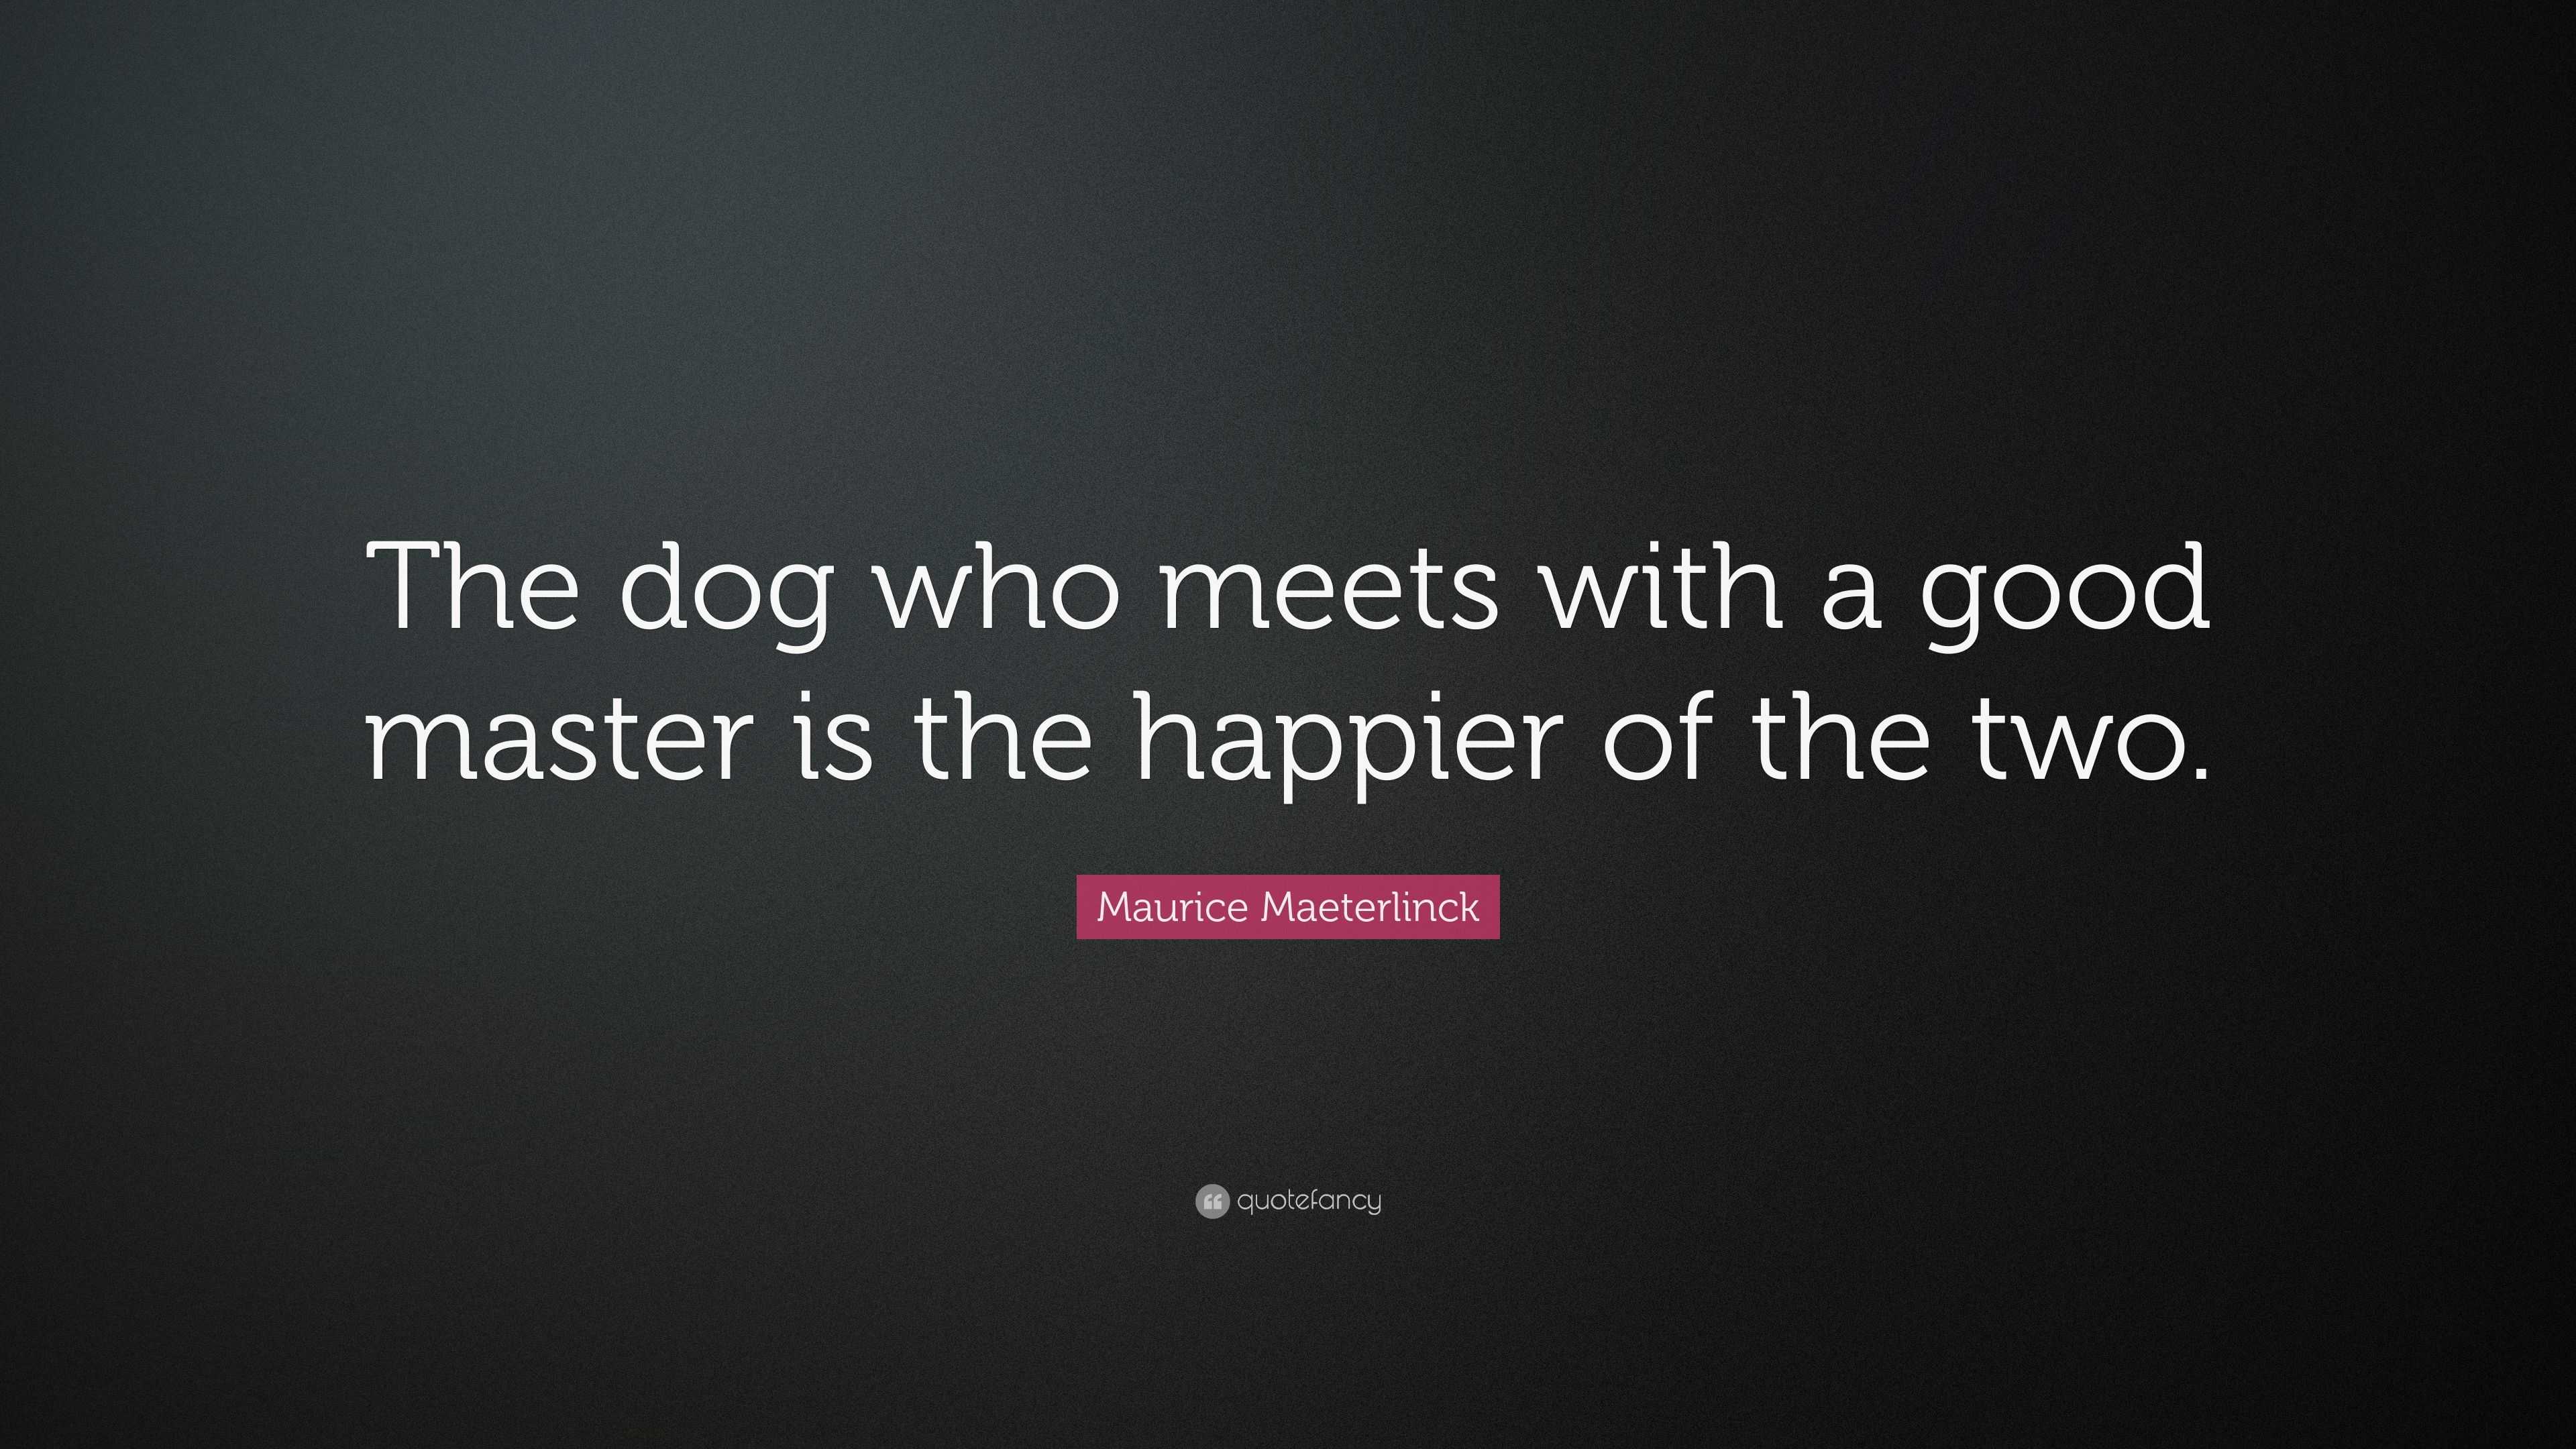 Our Friend the Dog by Maurice Maeterlinck